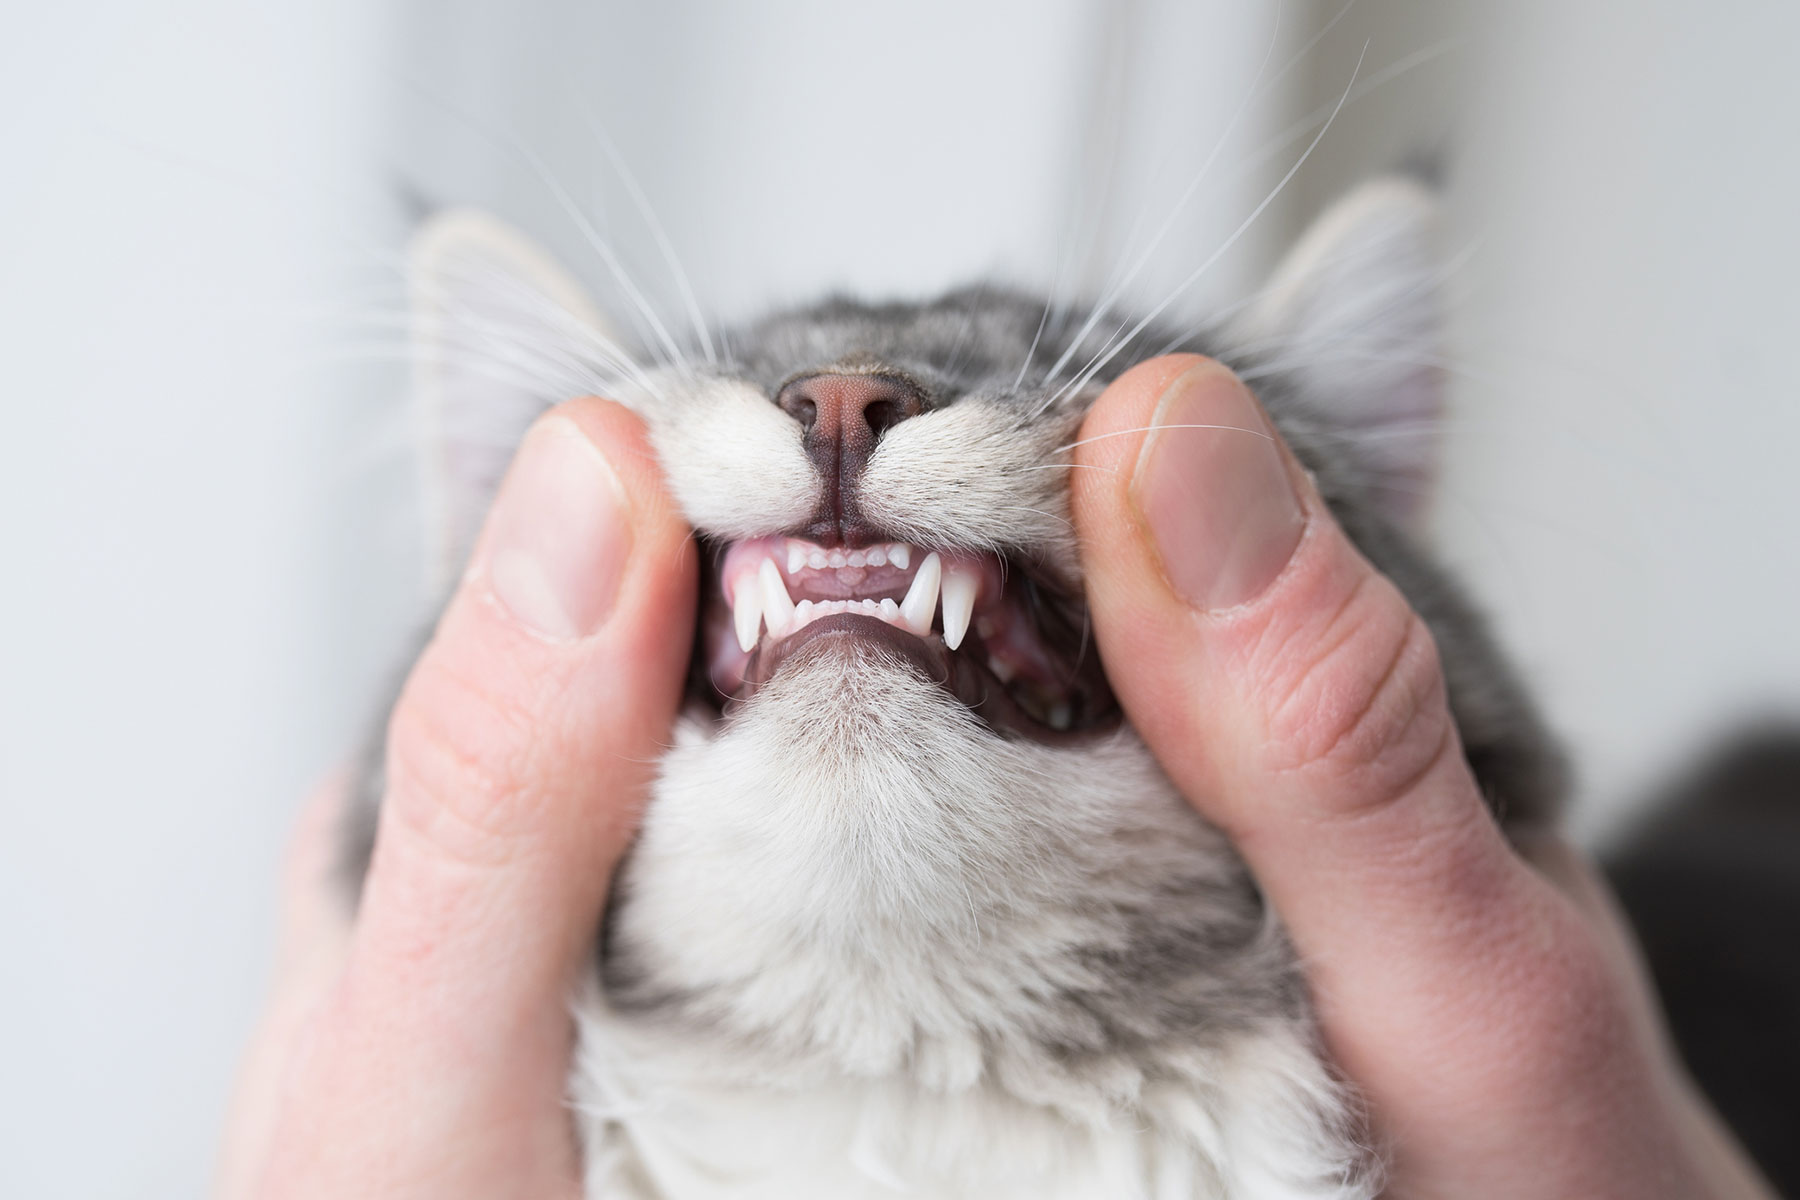 The Importance of Dental Care for Your Pet